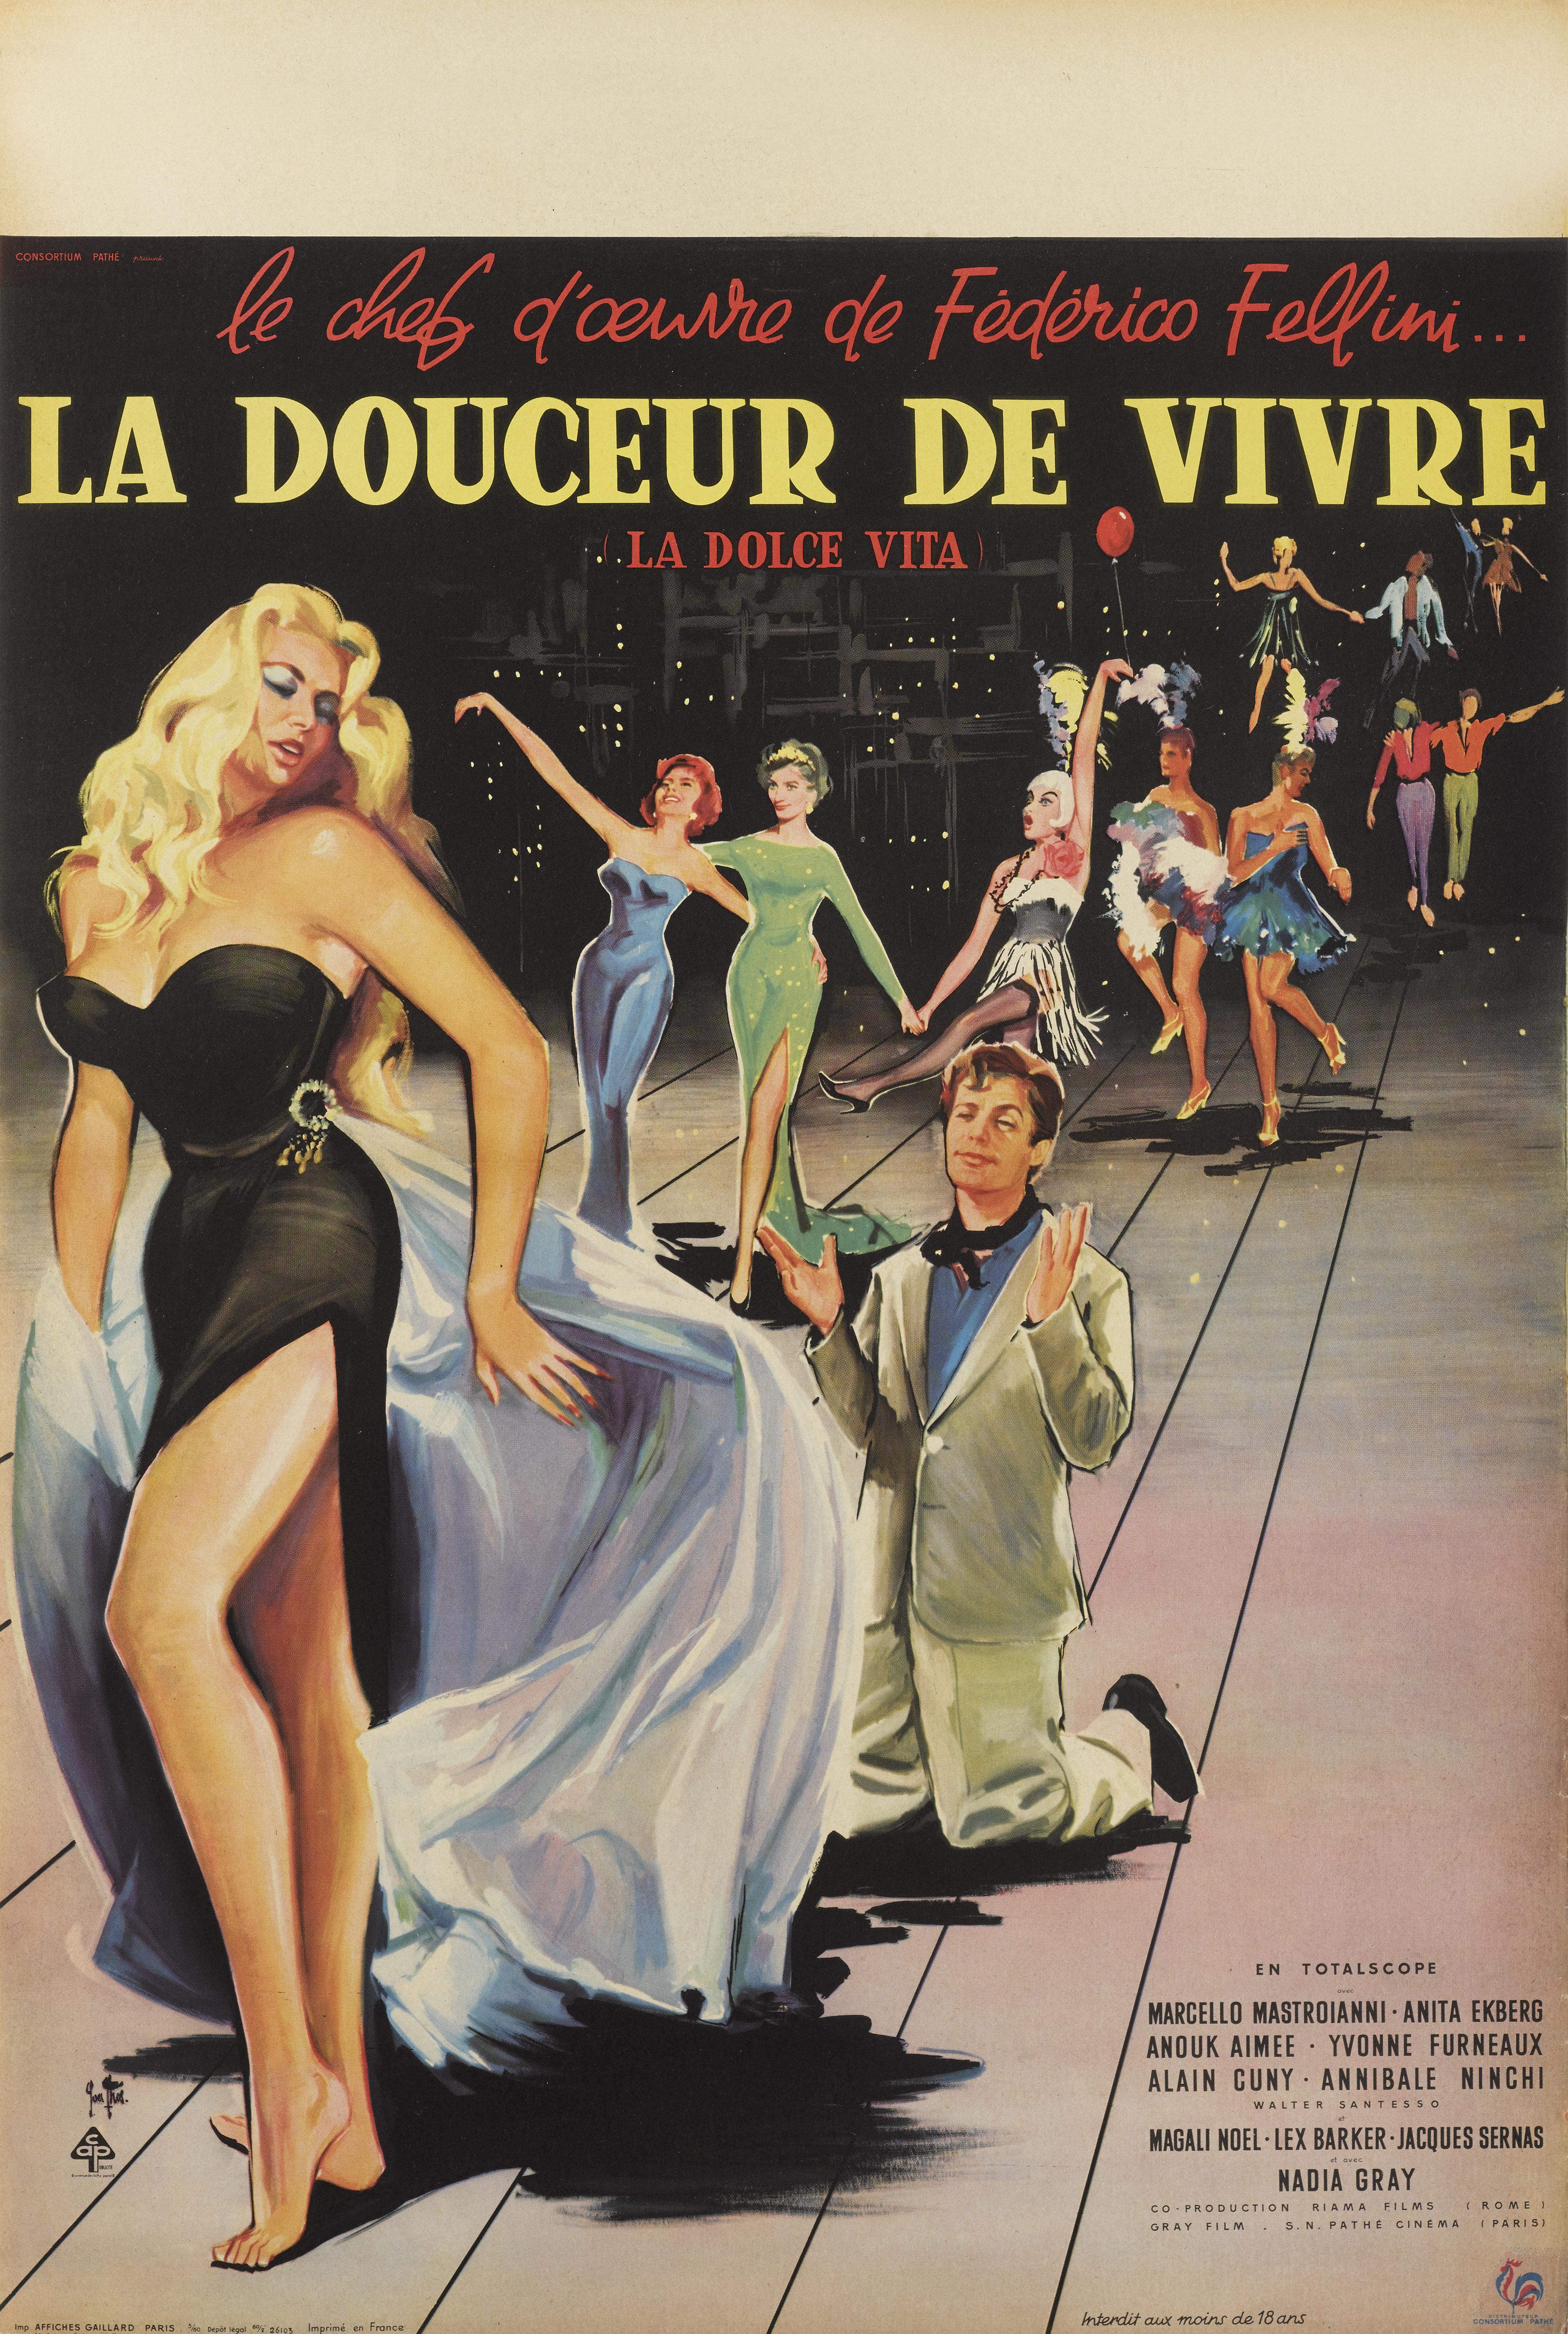 Original French film poster for the 1960 film “La Dolce VITA”.
Perhaps no film has ever managed to capture the spirit, perhaps even the flavor of the generation that begot it as Fellini's masterpiece La Dolce VITA. From the opening shot of Marcello